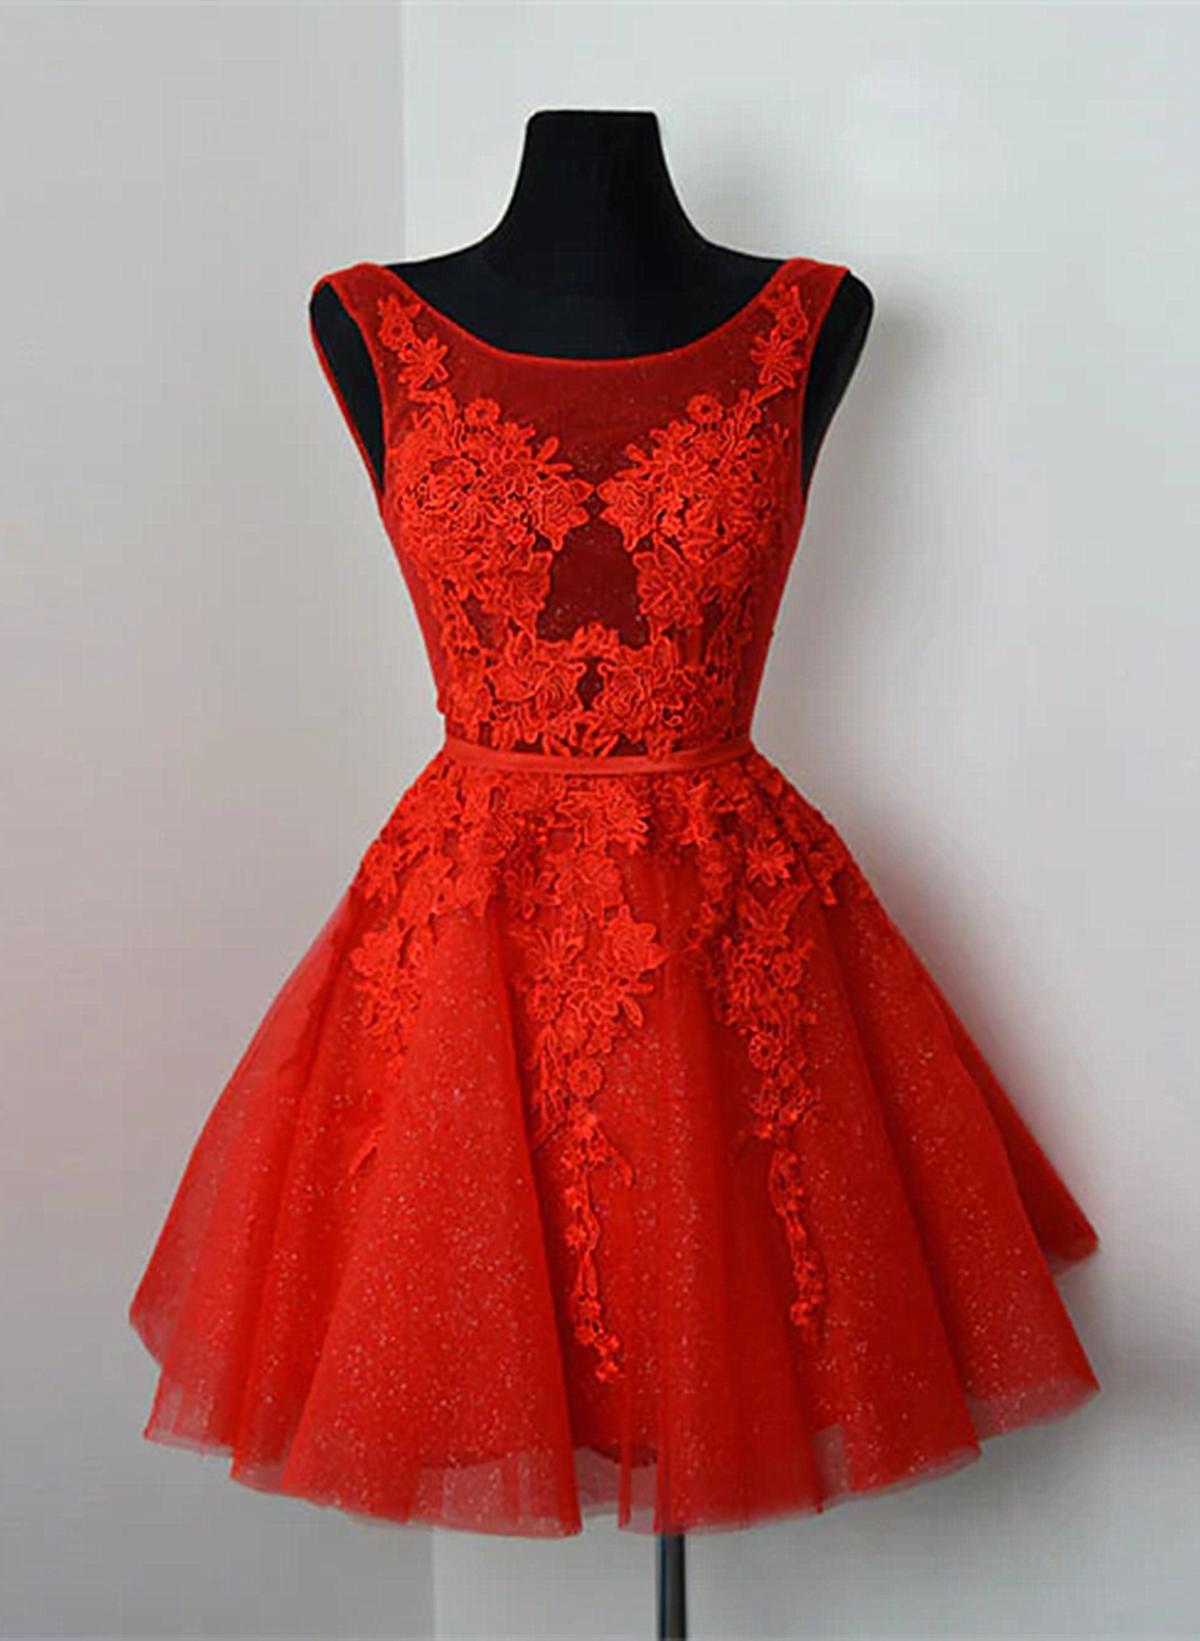 Red Lace Round Neckline Short Party Dress Outfits For Girls, Red Short Homecoming Dress